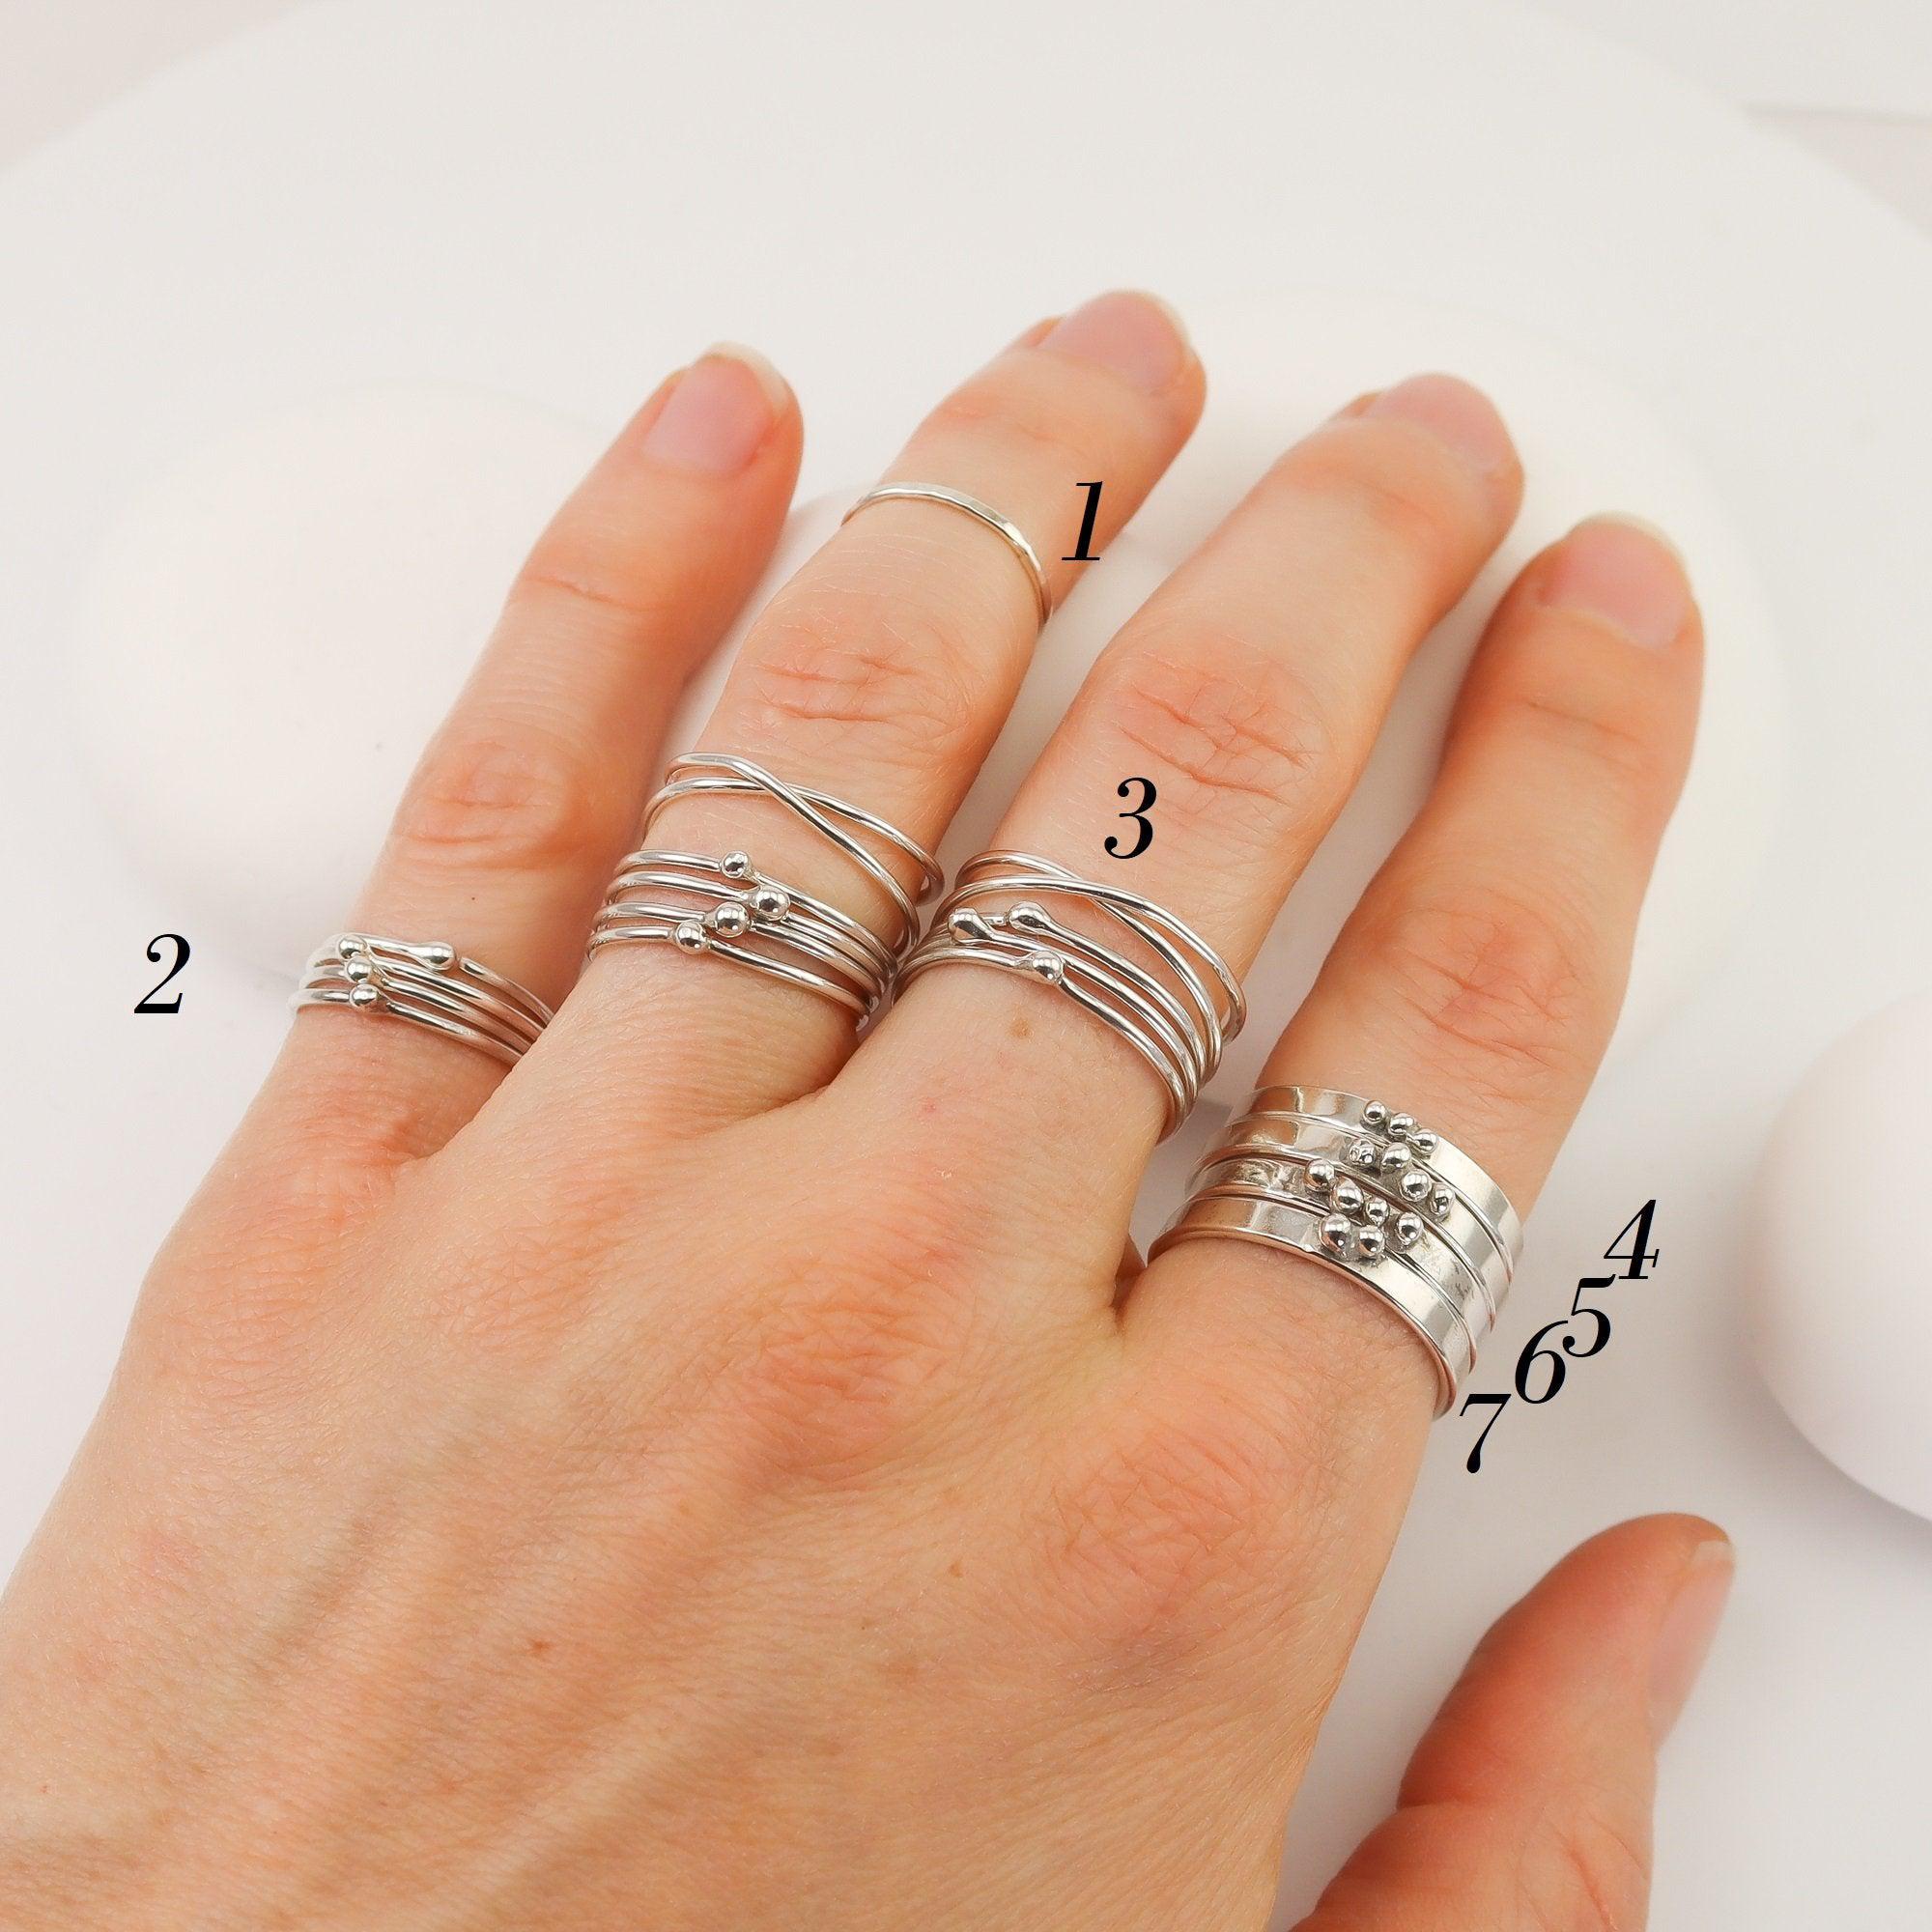 Tall Silver Stacking Ring, Triple Layer Ring, 3 Tier Ring, Silver Statement  Ring, Multi-layer Silver Ring, Adjustable Ring, Unisex, Gift - Etsy |  Statement ring silver, Silver rings, Silver stacking rings